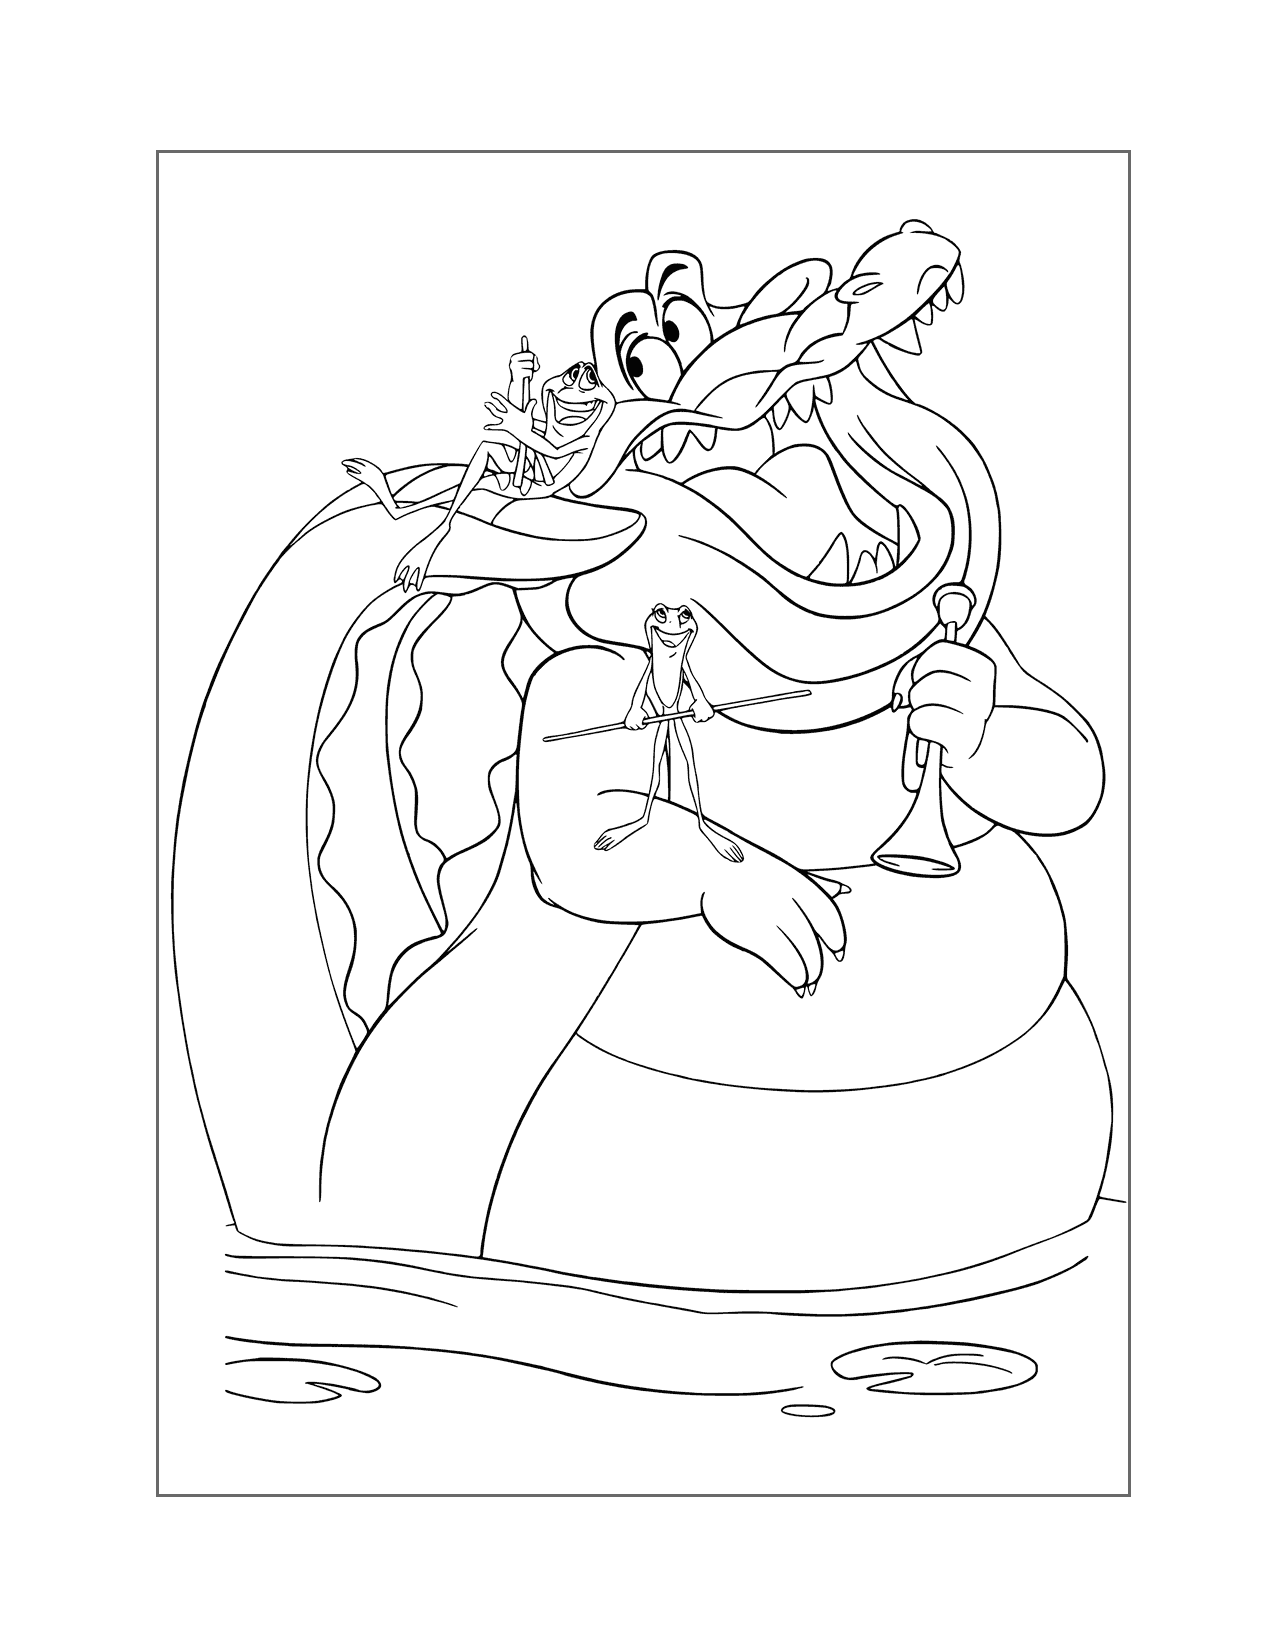 Jazz Time Princess And The Frog Coloring Page